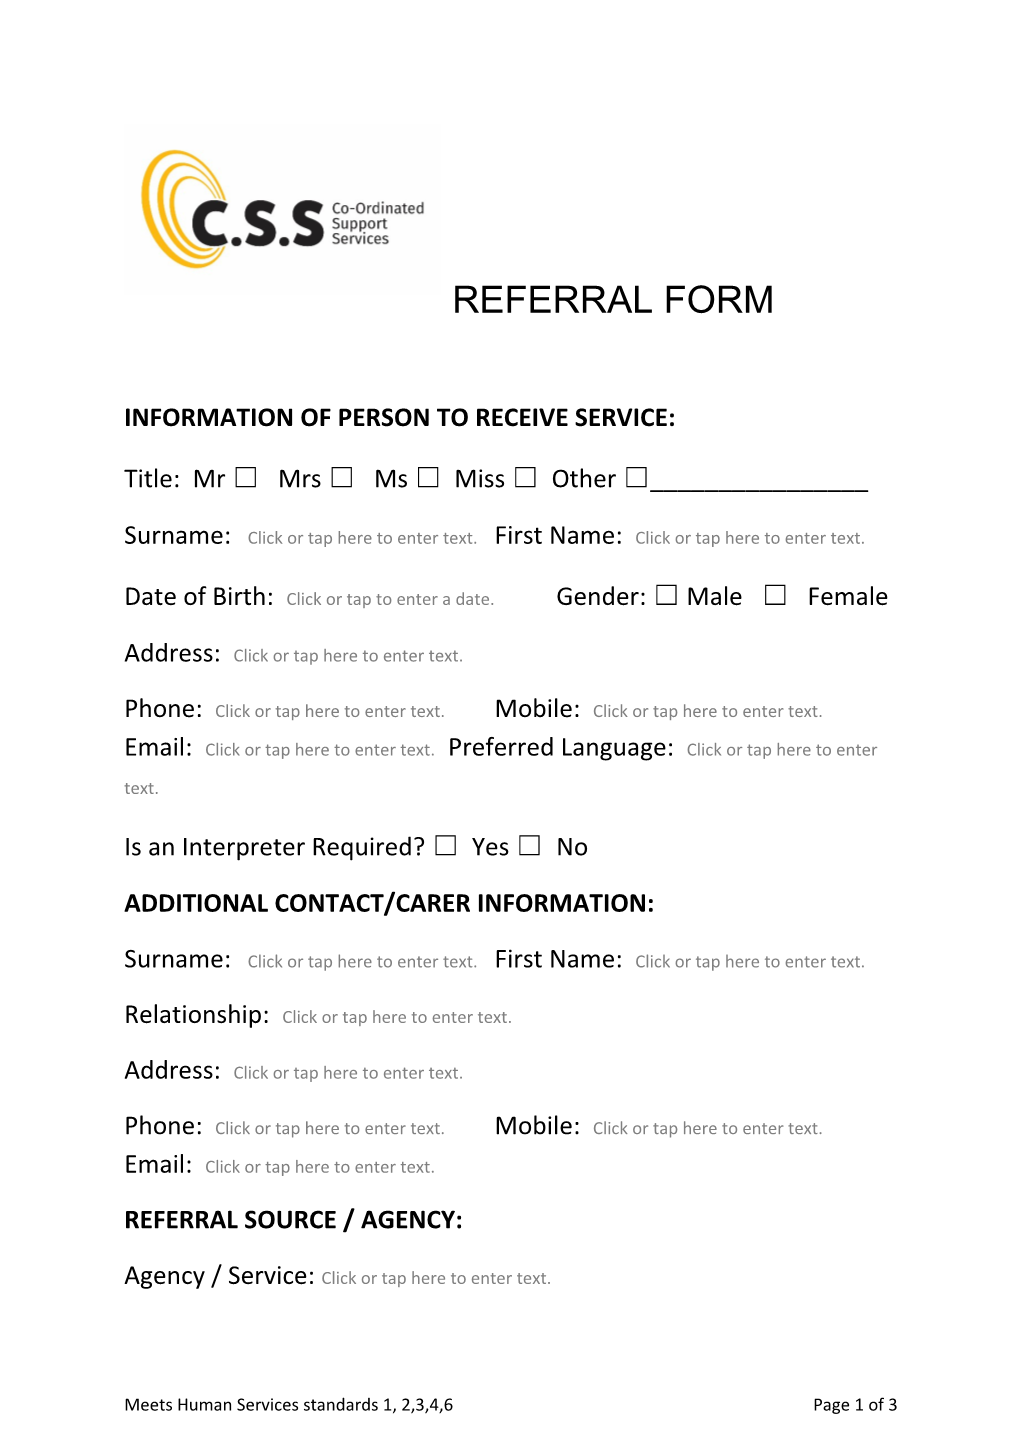 Information of Person to Receive Service